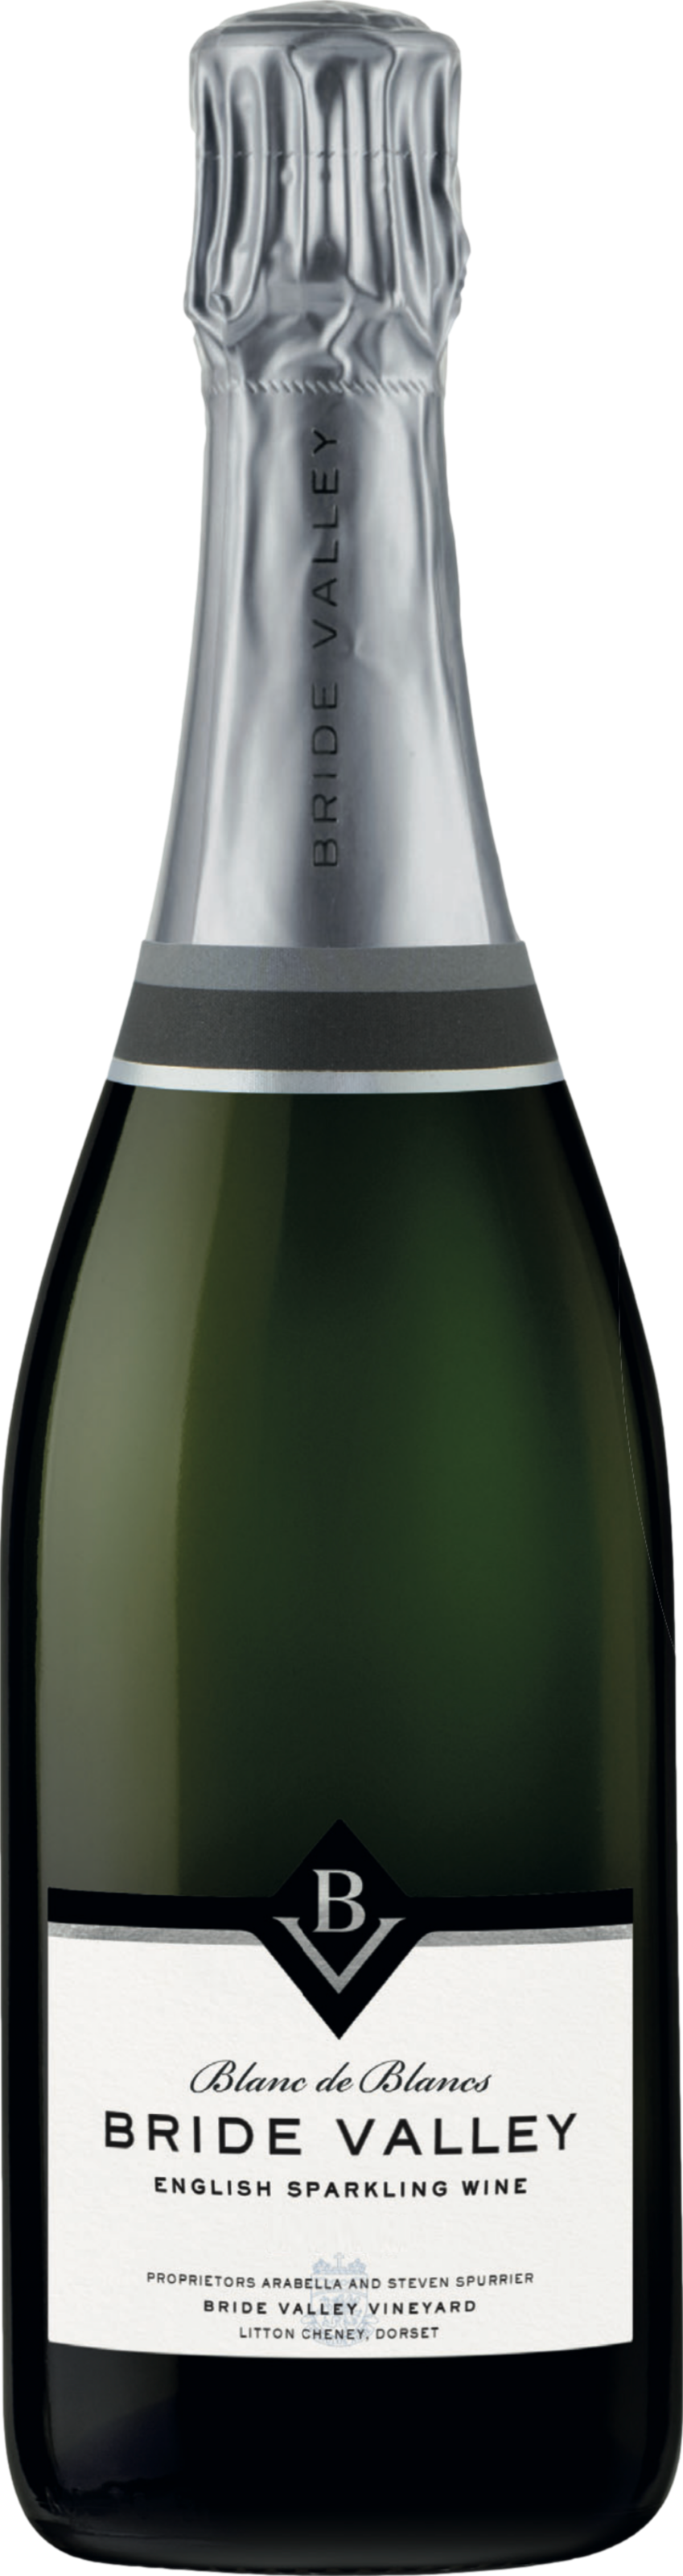 Product image of Bride Valley Blanc de Blancs Brut 2017 from 8wines